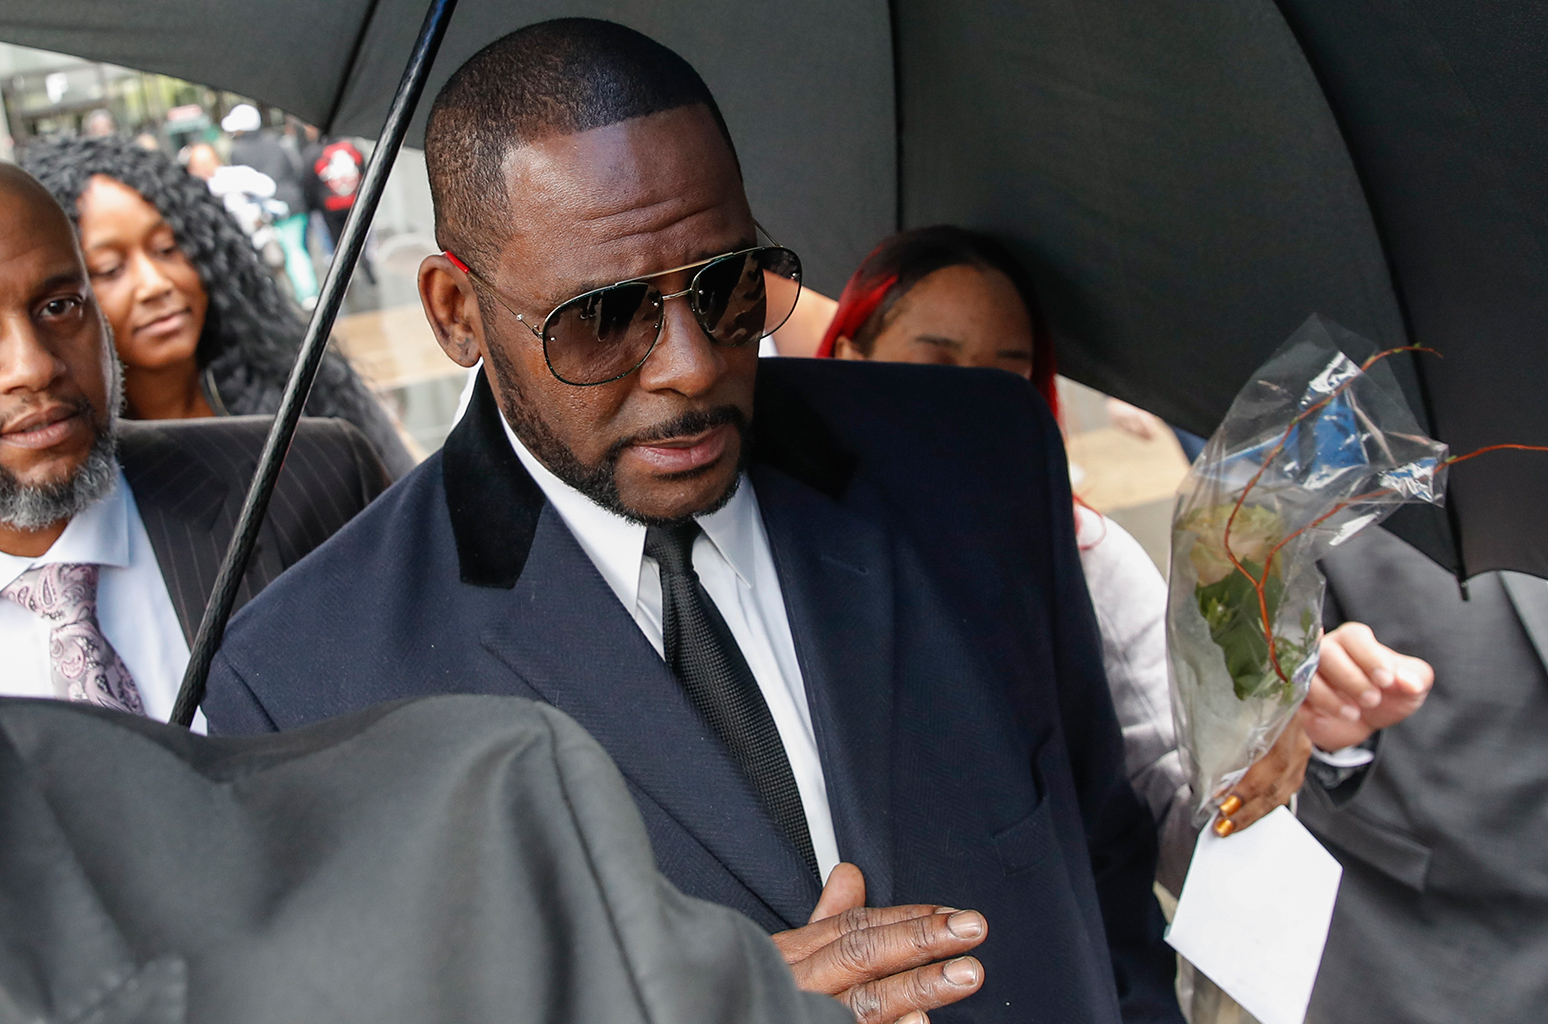 R. Kelly Girlfriends Azriel Clary & Joycelyn Savage Involved in Physical Altercation at His Chicago Home